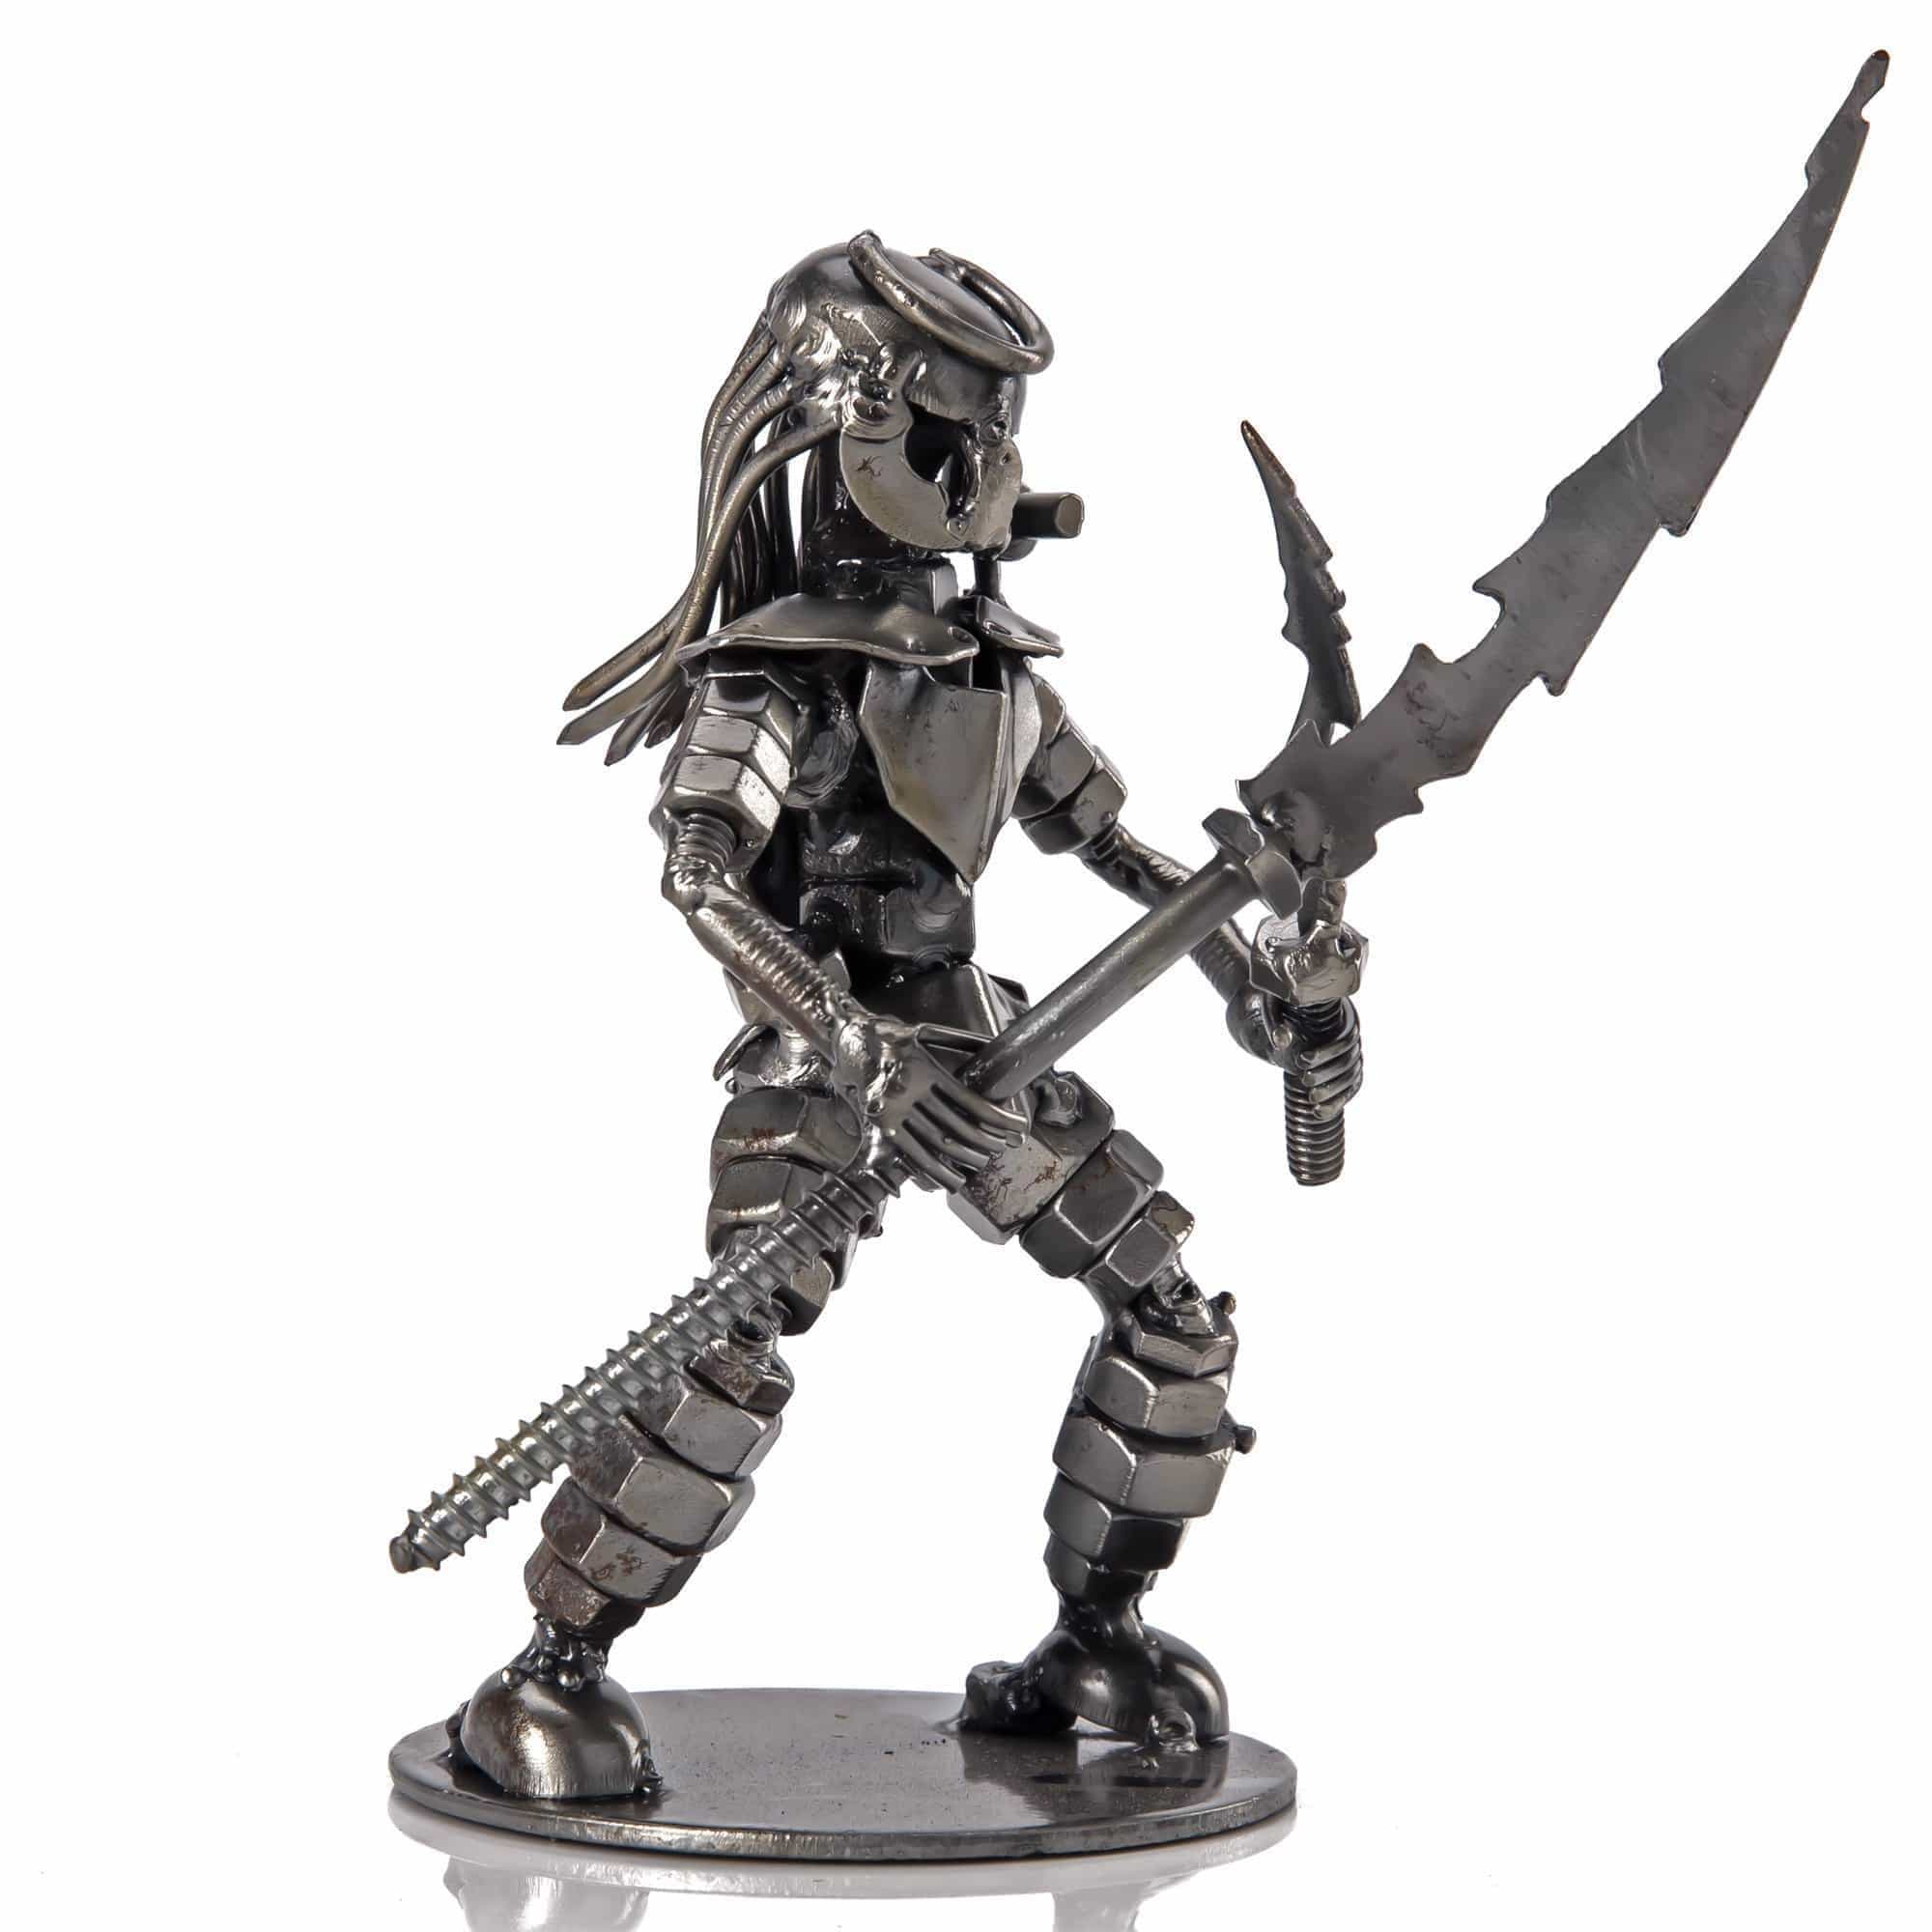 Kalifano Recycled Metal Art Dual Wielding Predator with Spear Inspired Recycled Metal Sculpture RMS-250PC-N